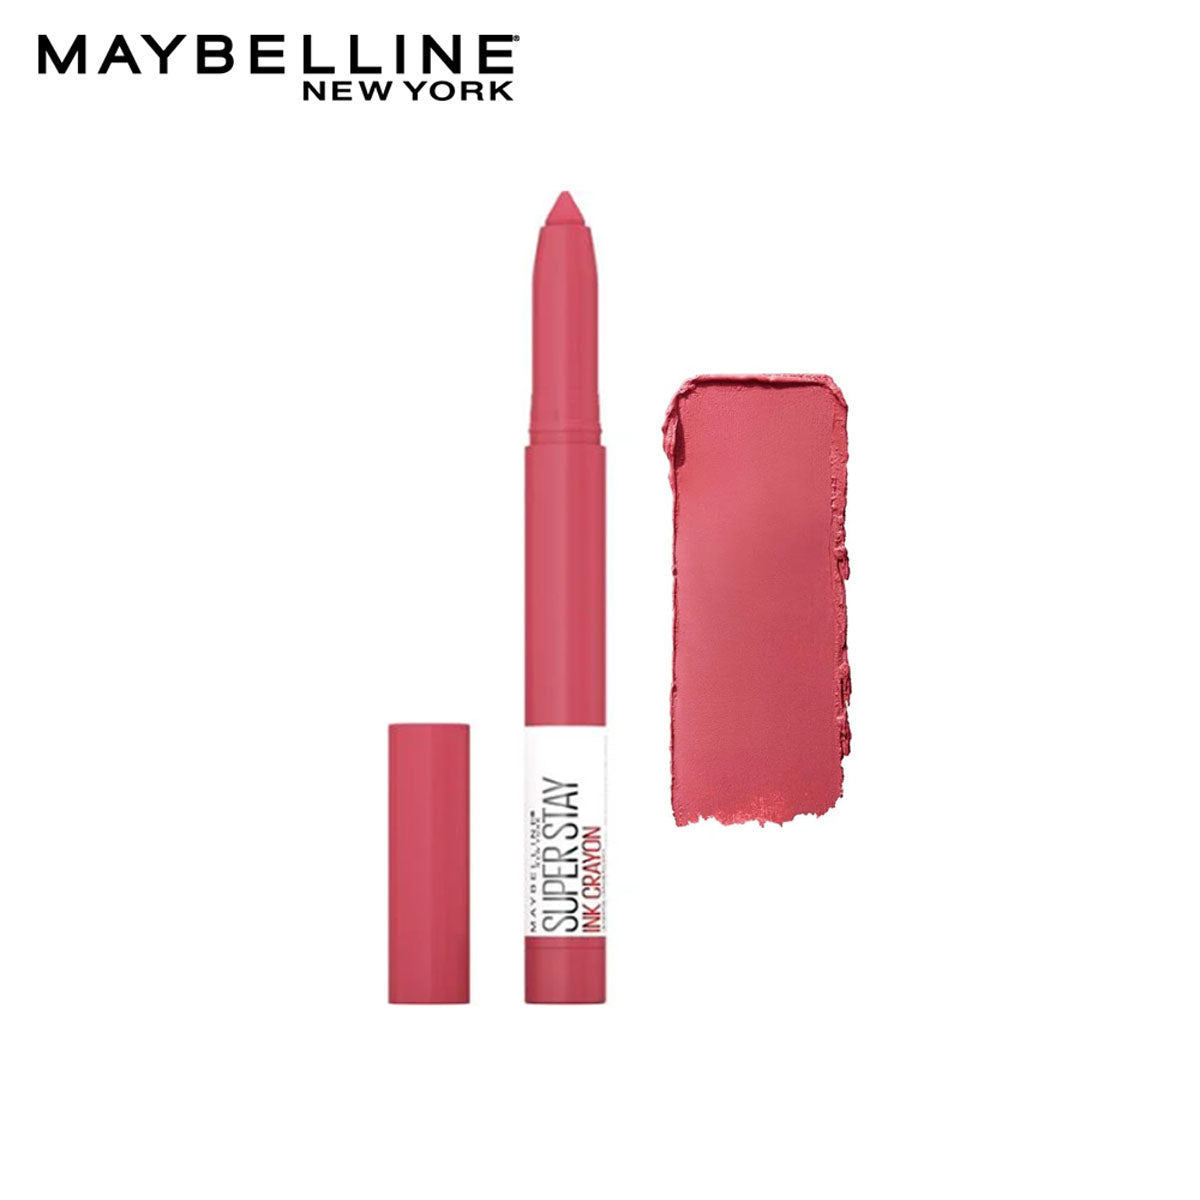 Maybelline - Superstay Ink Crayon Lipstick - 85 Change is good